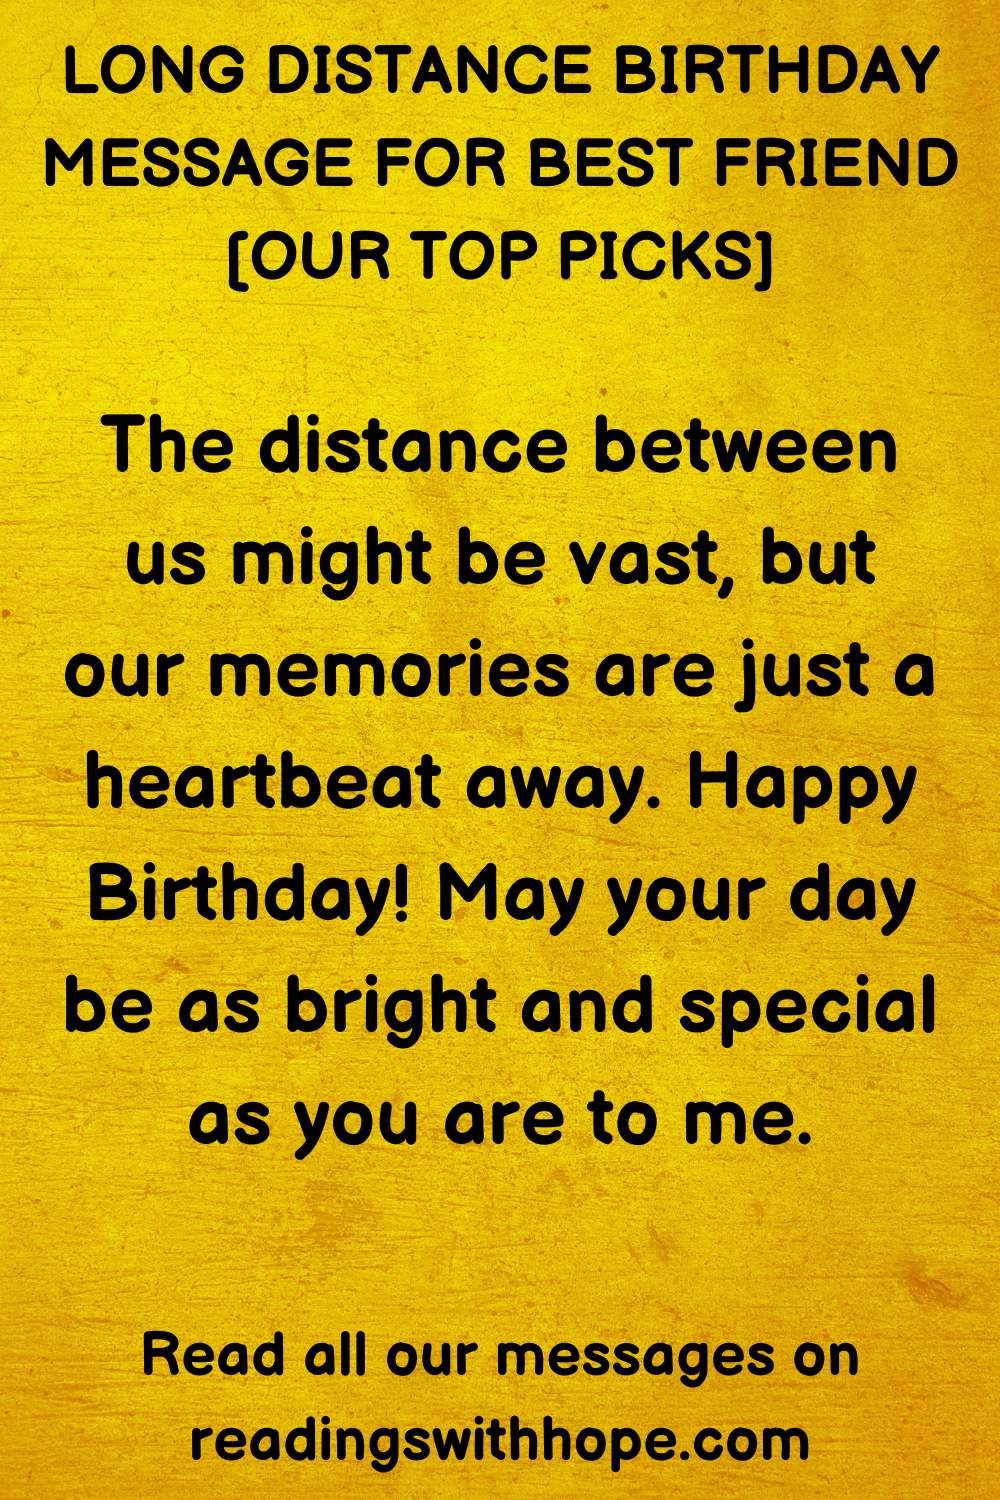 Long Distance Birthday Message for Best Friend 1